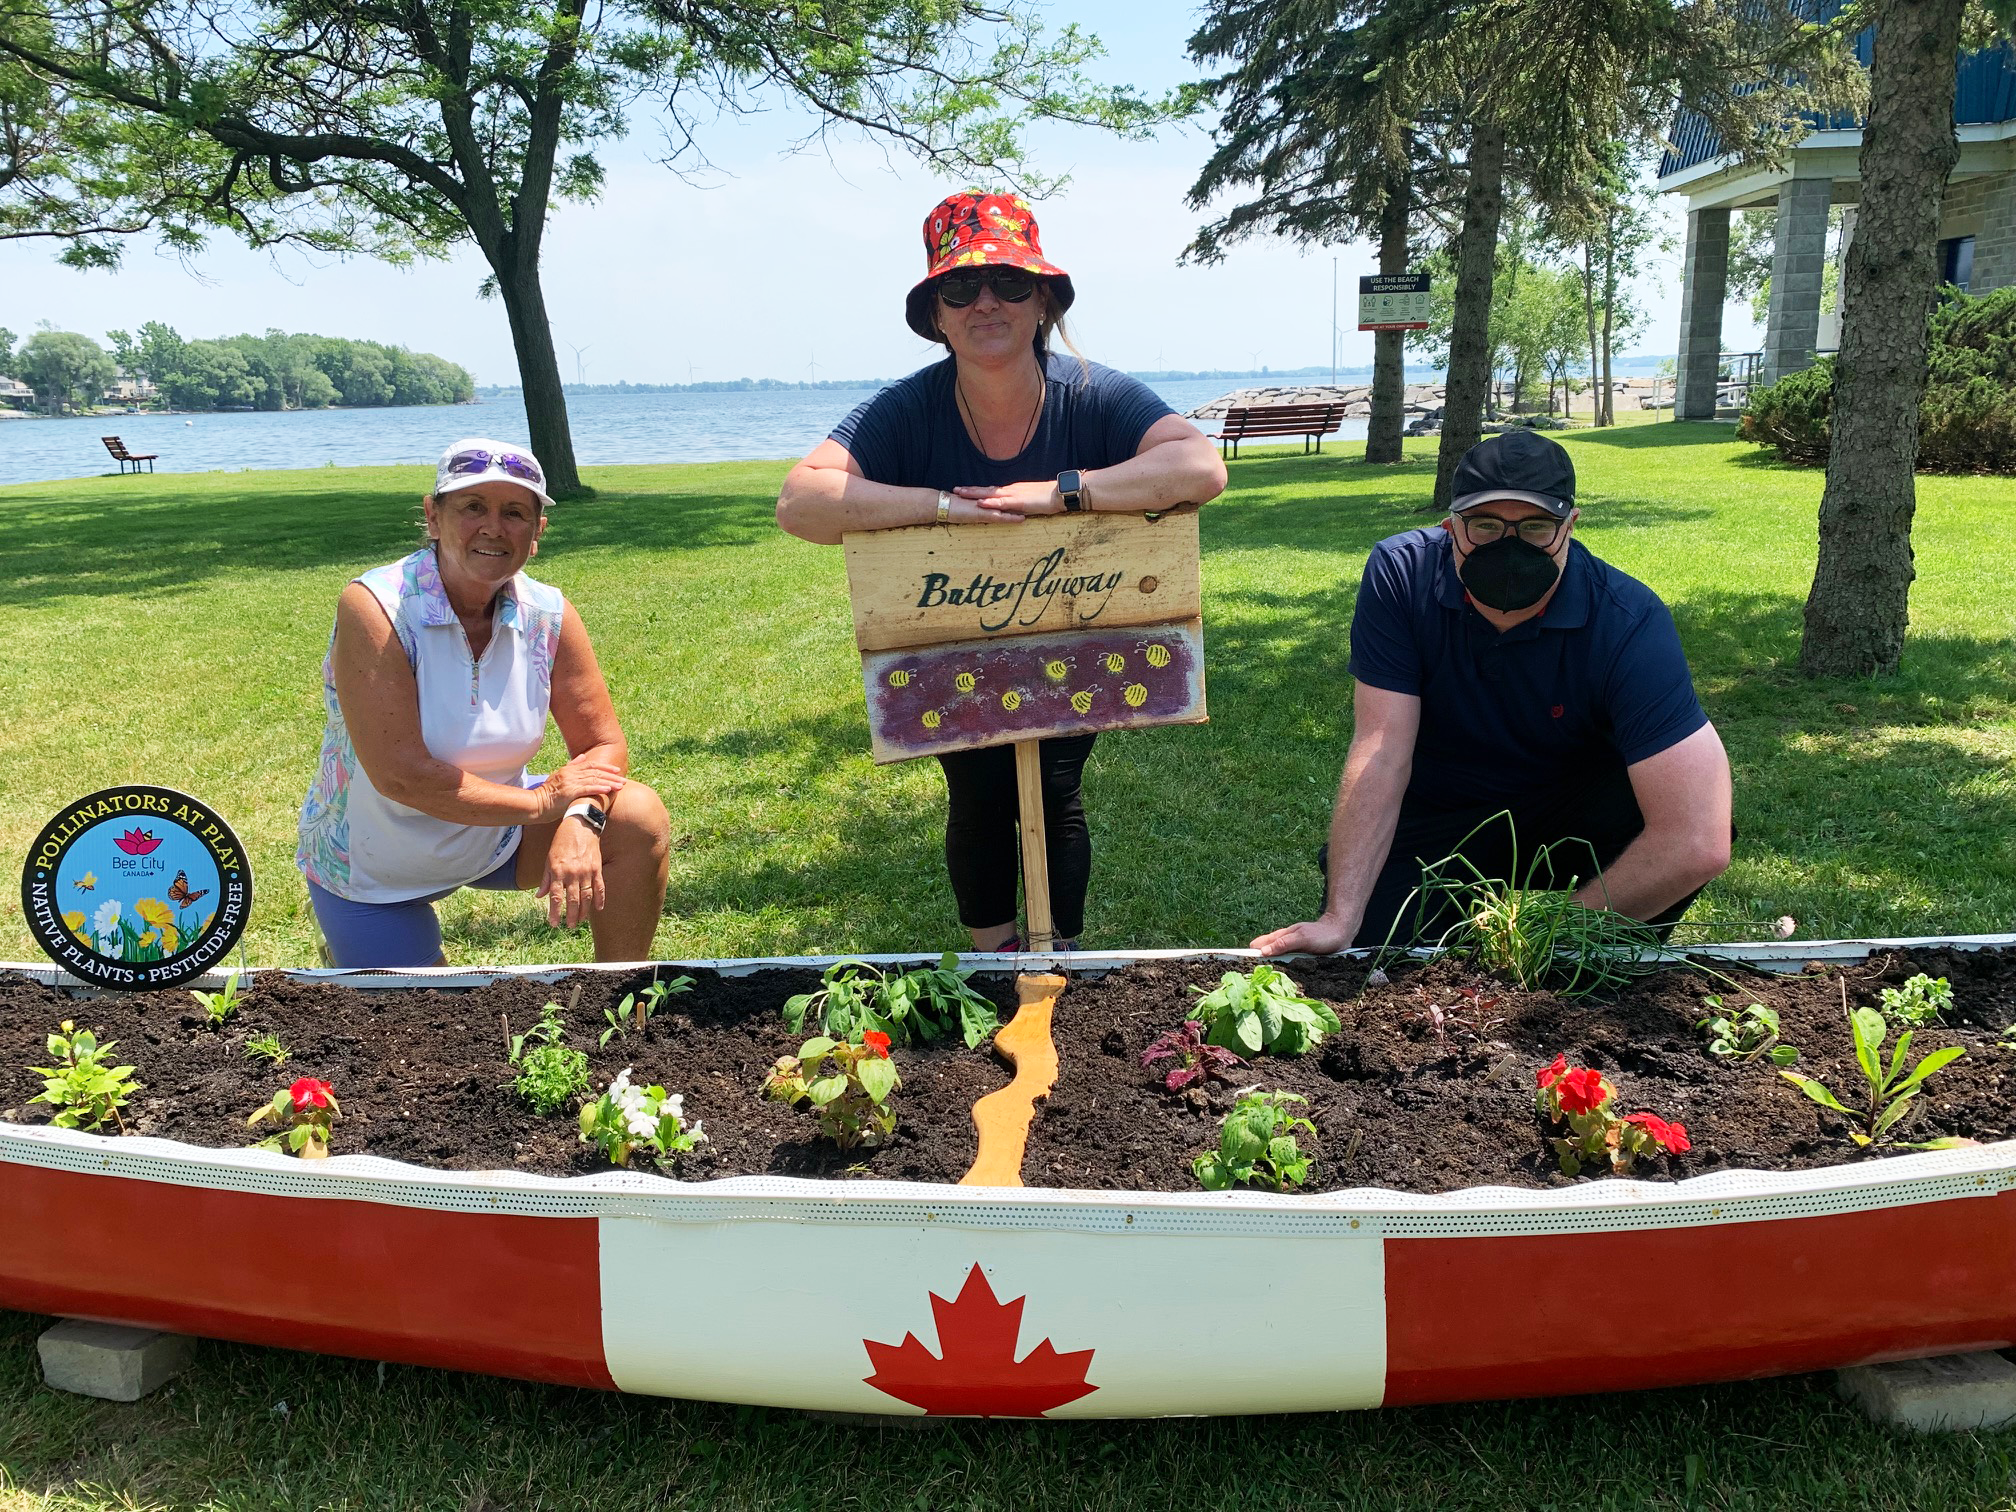 Bath Gardening Club members and Loyalist Township's Climate Action Coordinator installing the pollinator garden within a canoe painted like the Canadian flag.